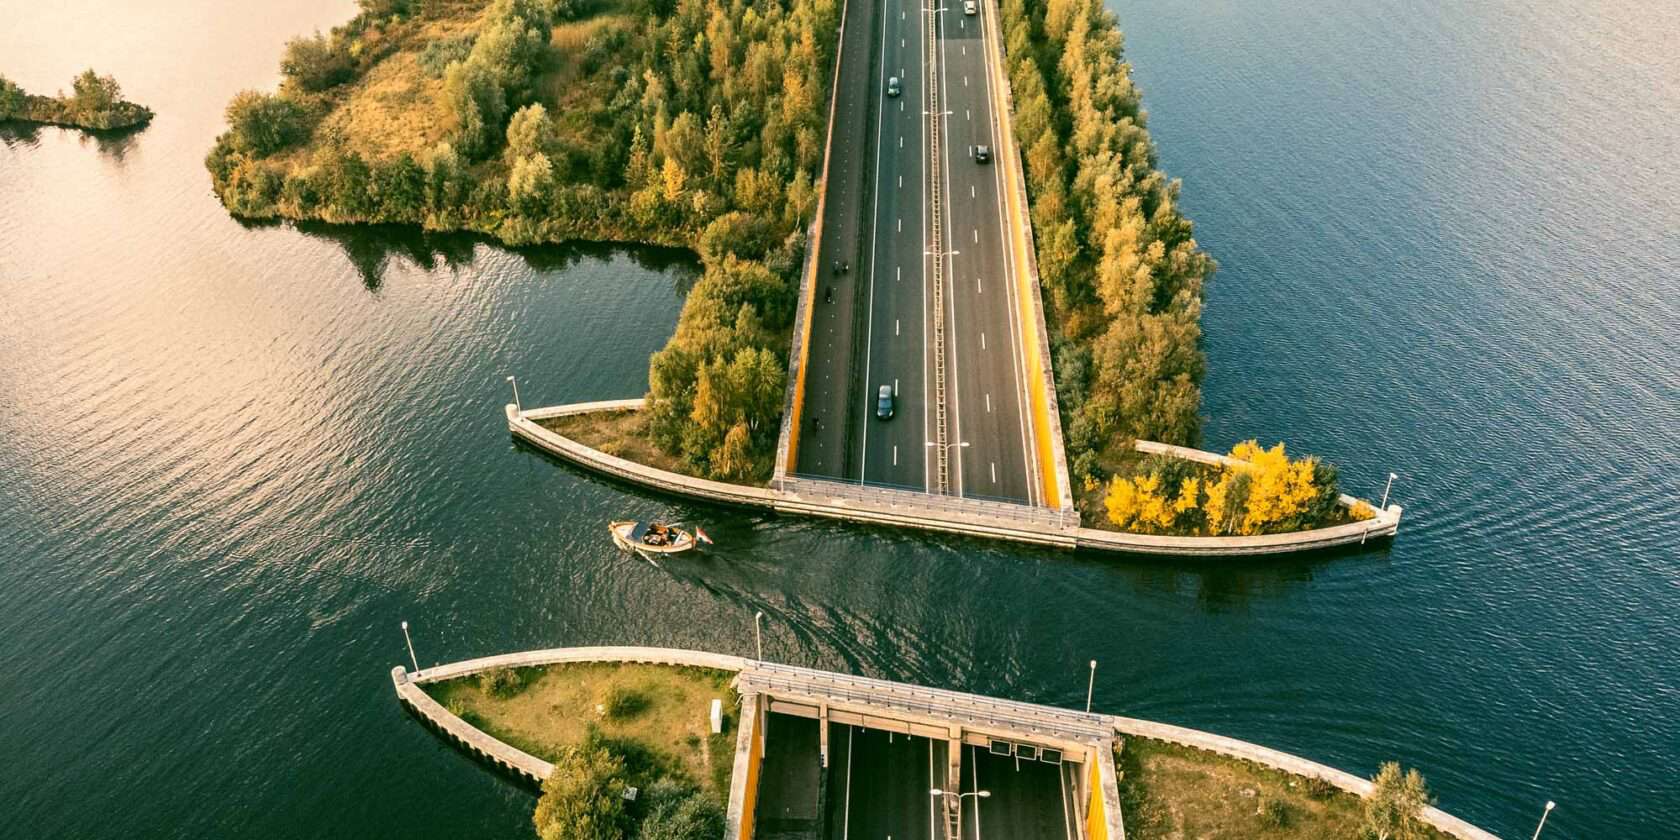 A road divided by a lake.